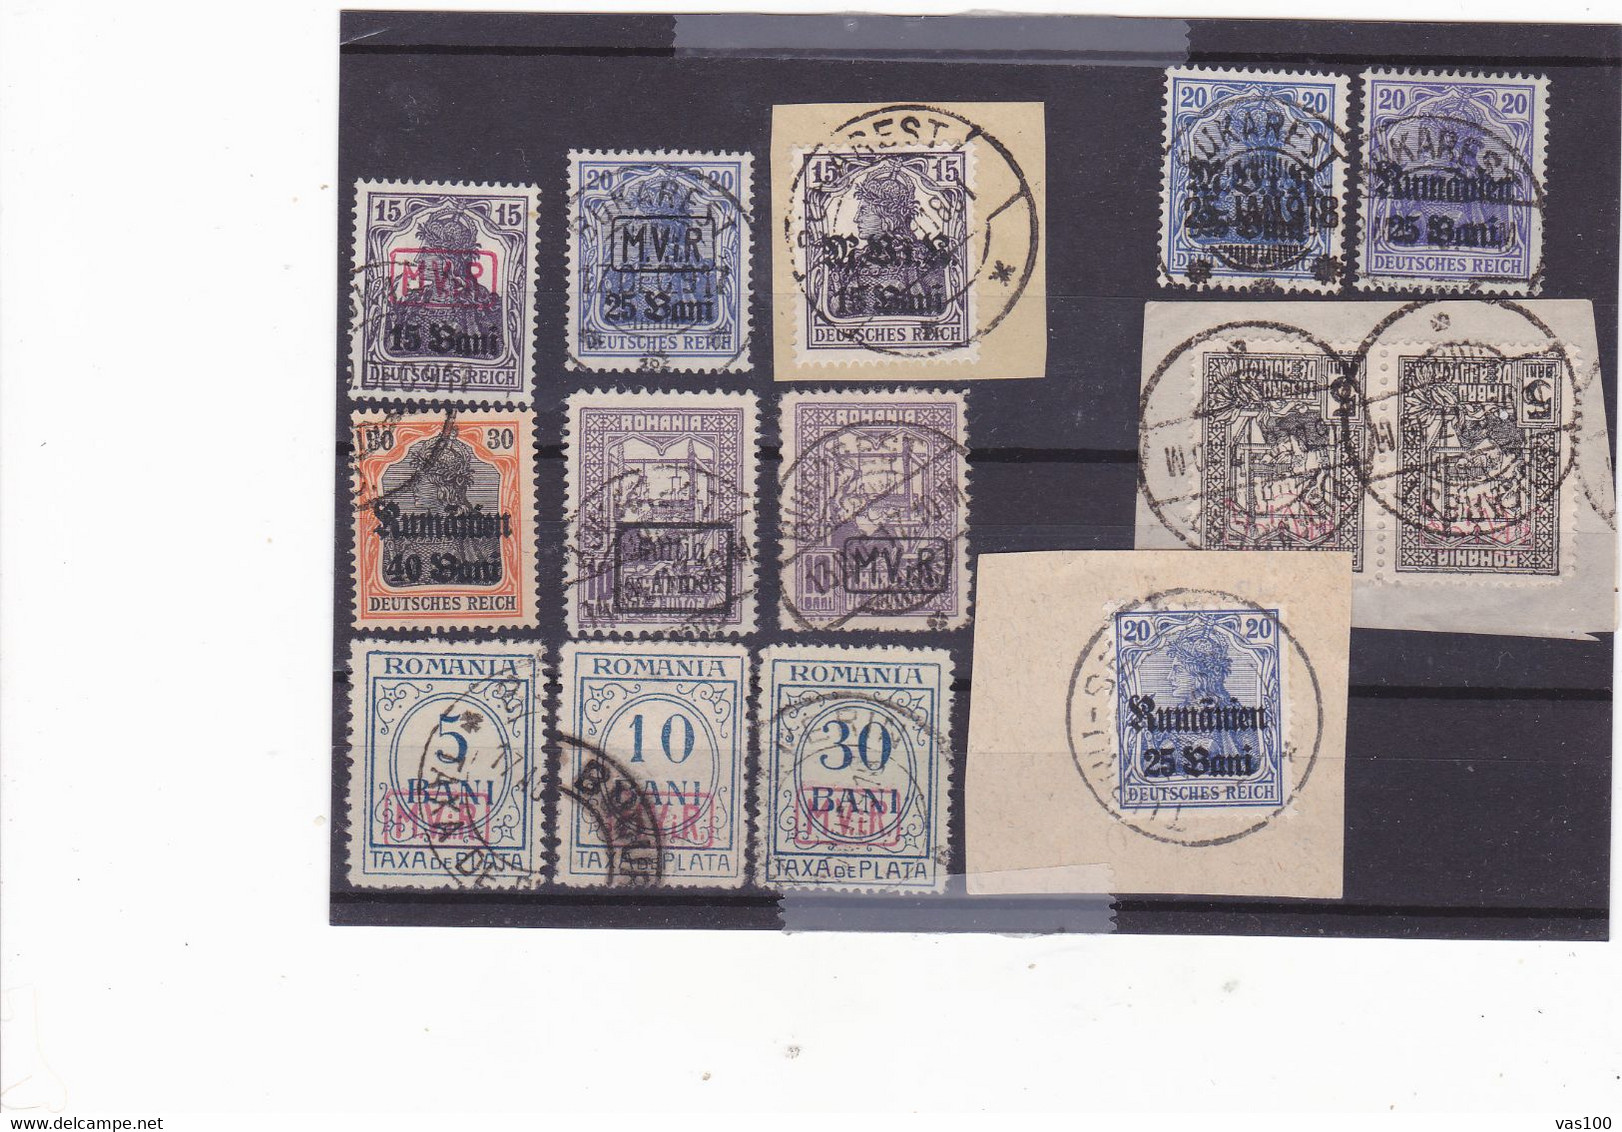 Germany Occupation Romania In WWI 1917-8 OVERPRINT LOT14 STAMPS - Bezetting